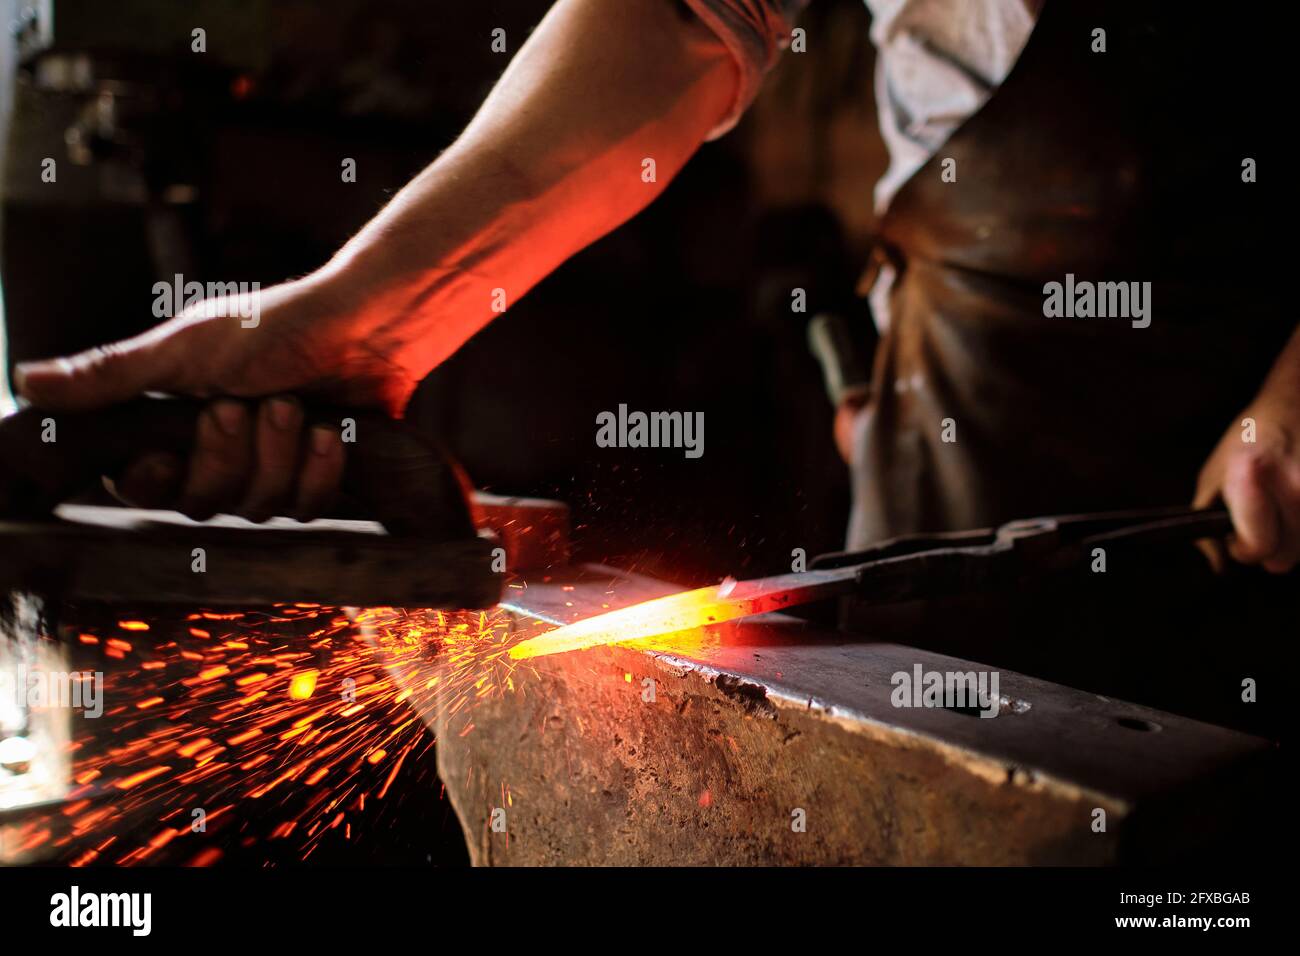 Male expert forging overheated metal on anvil at blacksmith shop Stock Photo